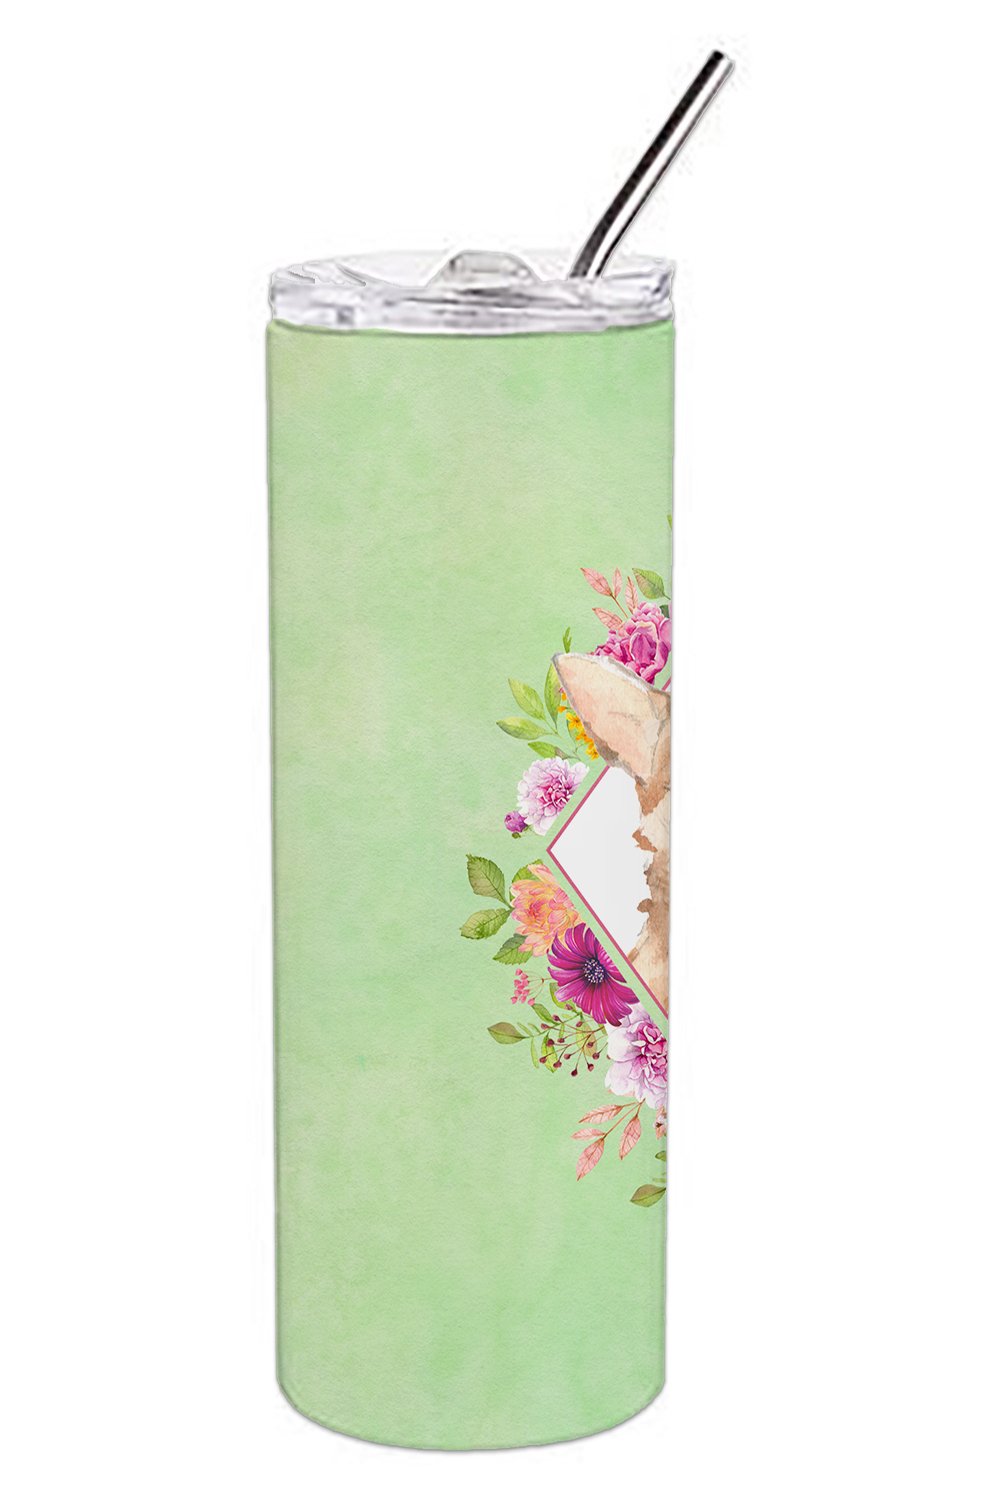 Chihuahua Green Flowers Double Walled Stainless Steel 20 oz Skinny Tumbler CK4405TBL20 by Caroline's Treasures